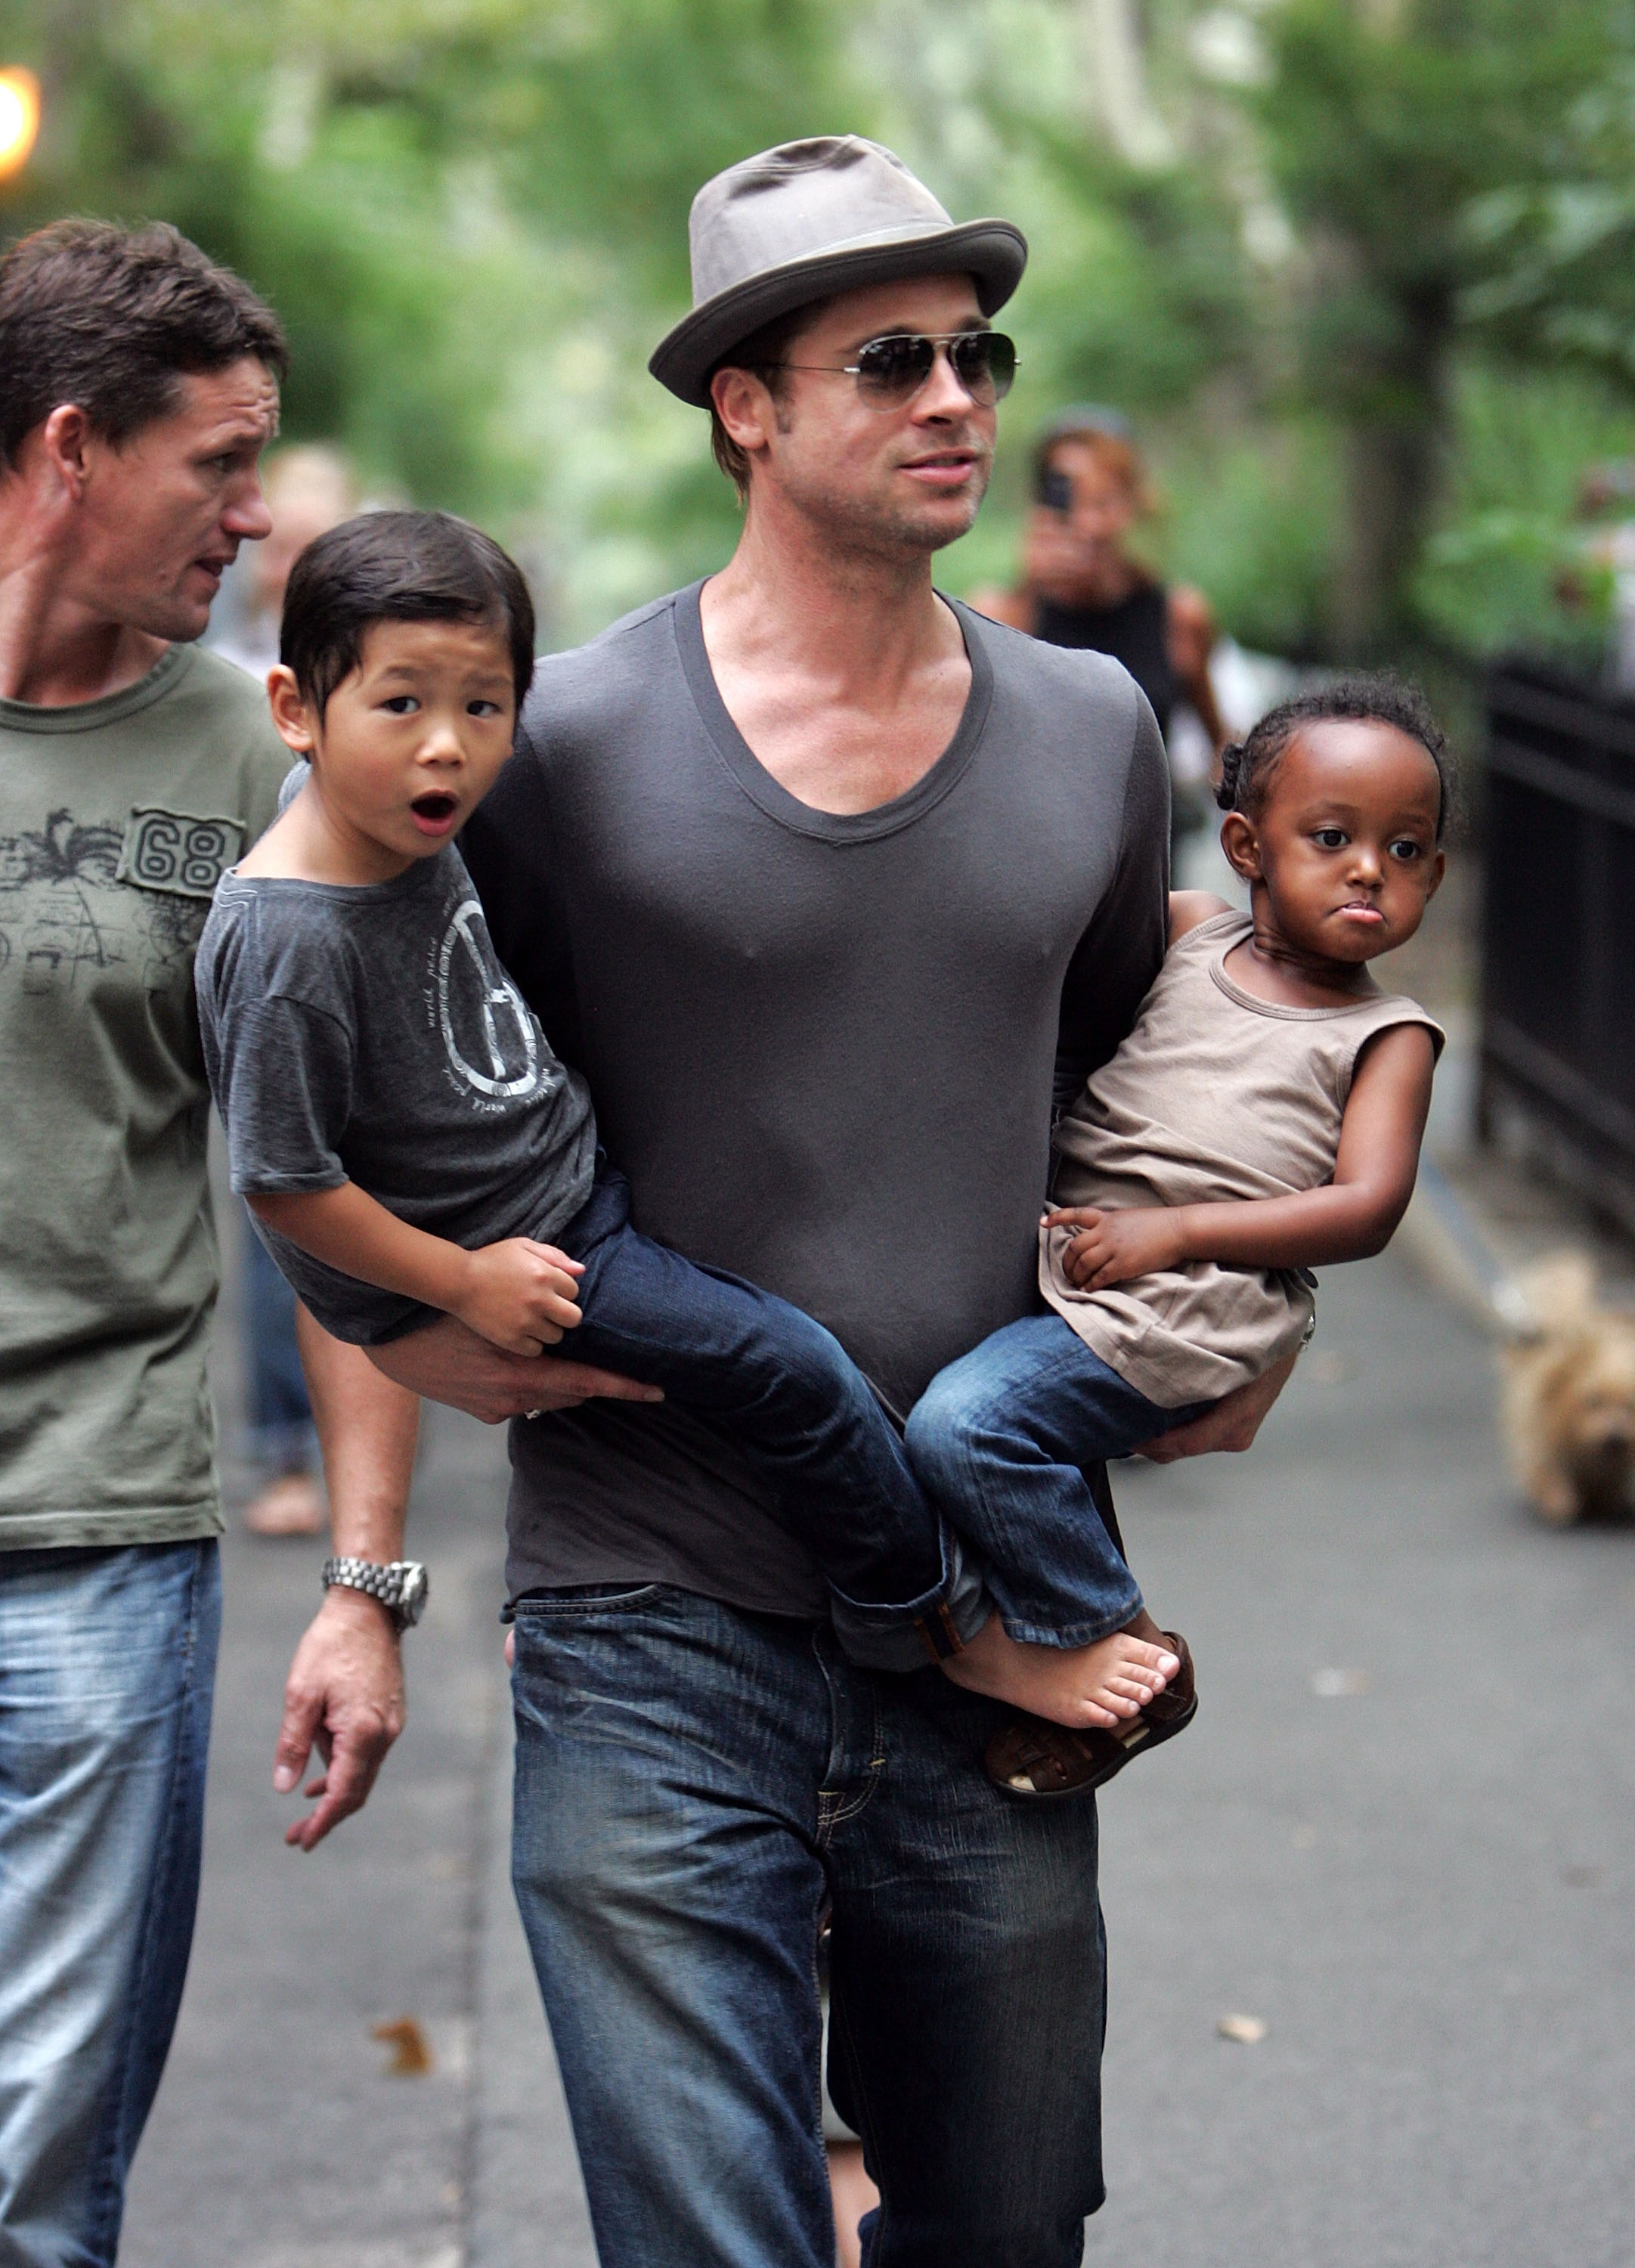 Brad Pitt spotted with his children Zahara Jolie-Pitt and Pax Jolie-Pitt in New York City on August 26, 2007 | Source: Getty Images